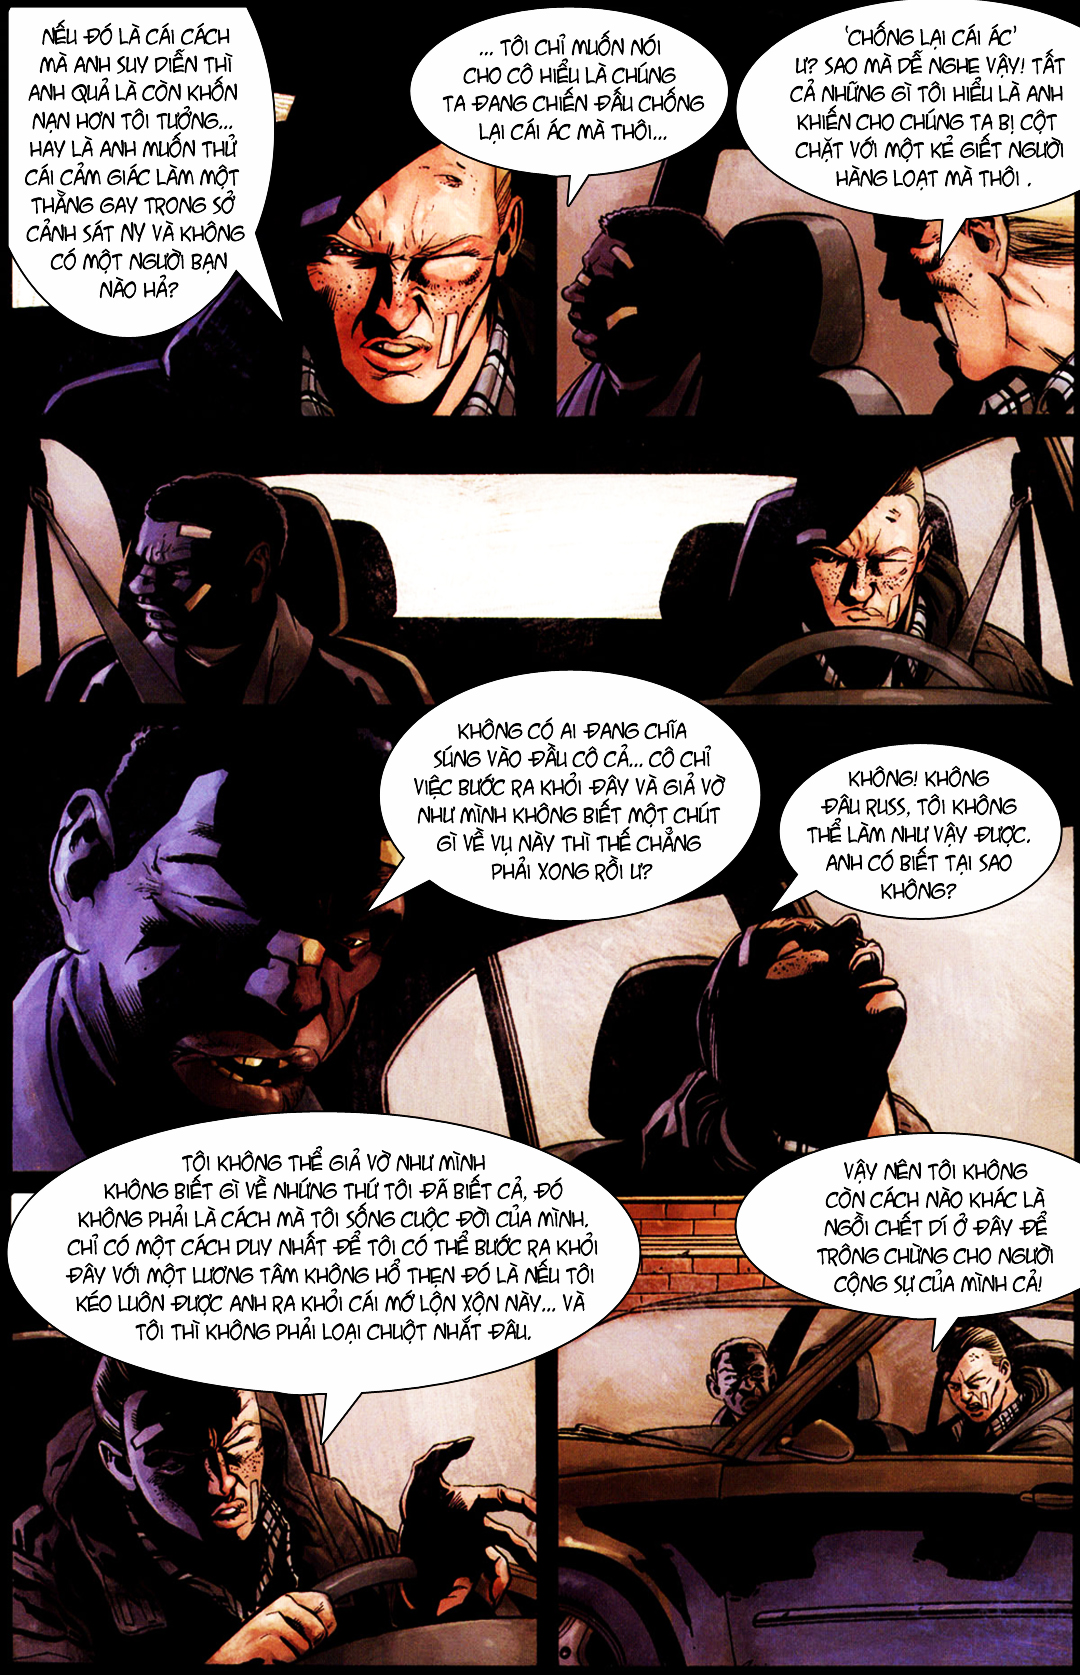 The Punisher: The Slavers chap 6 trang 5